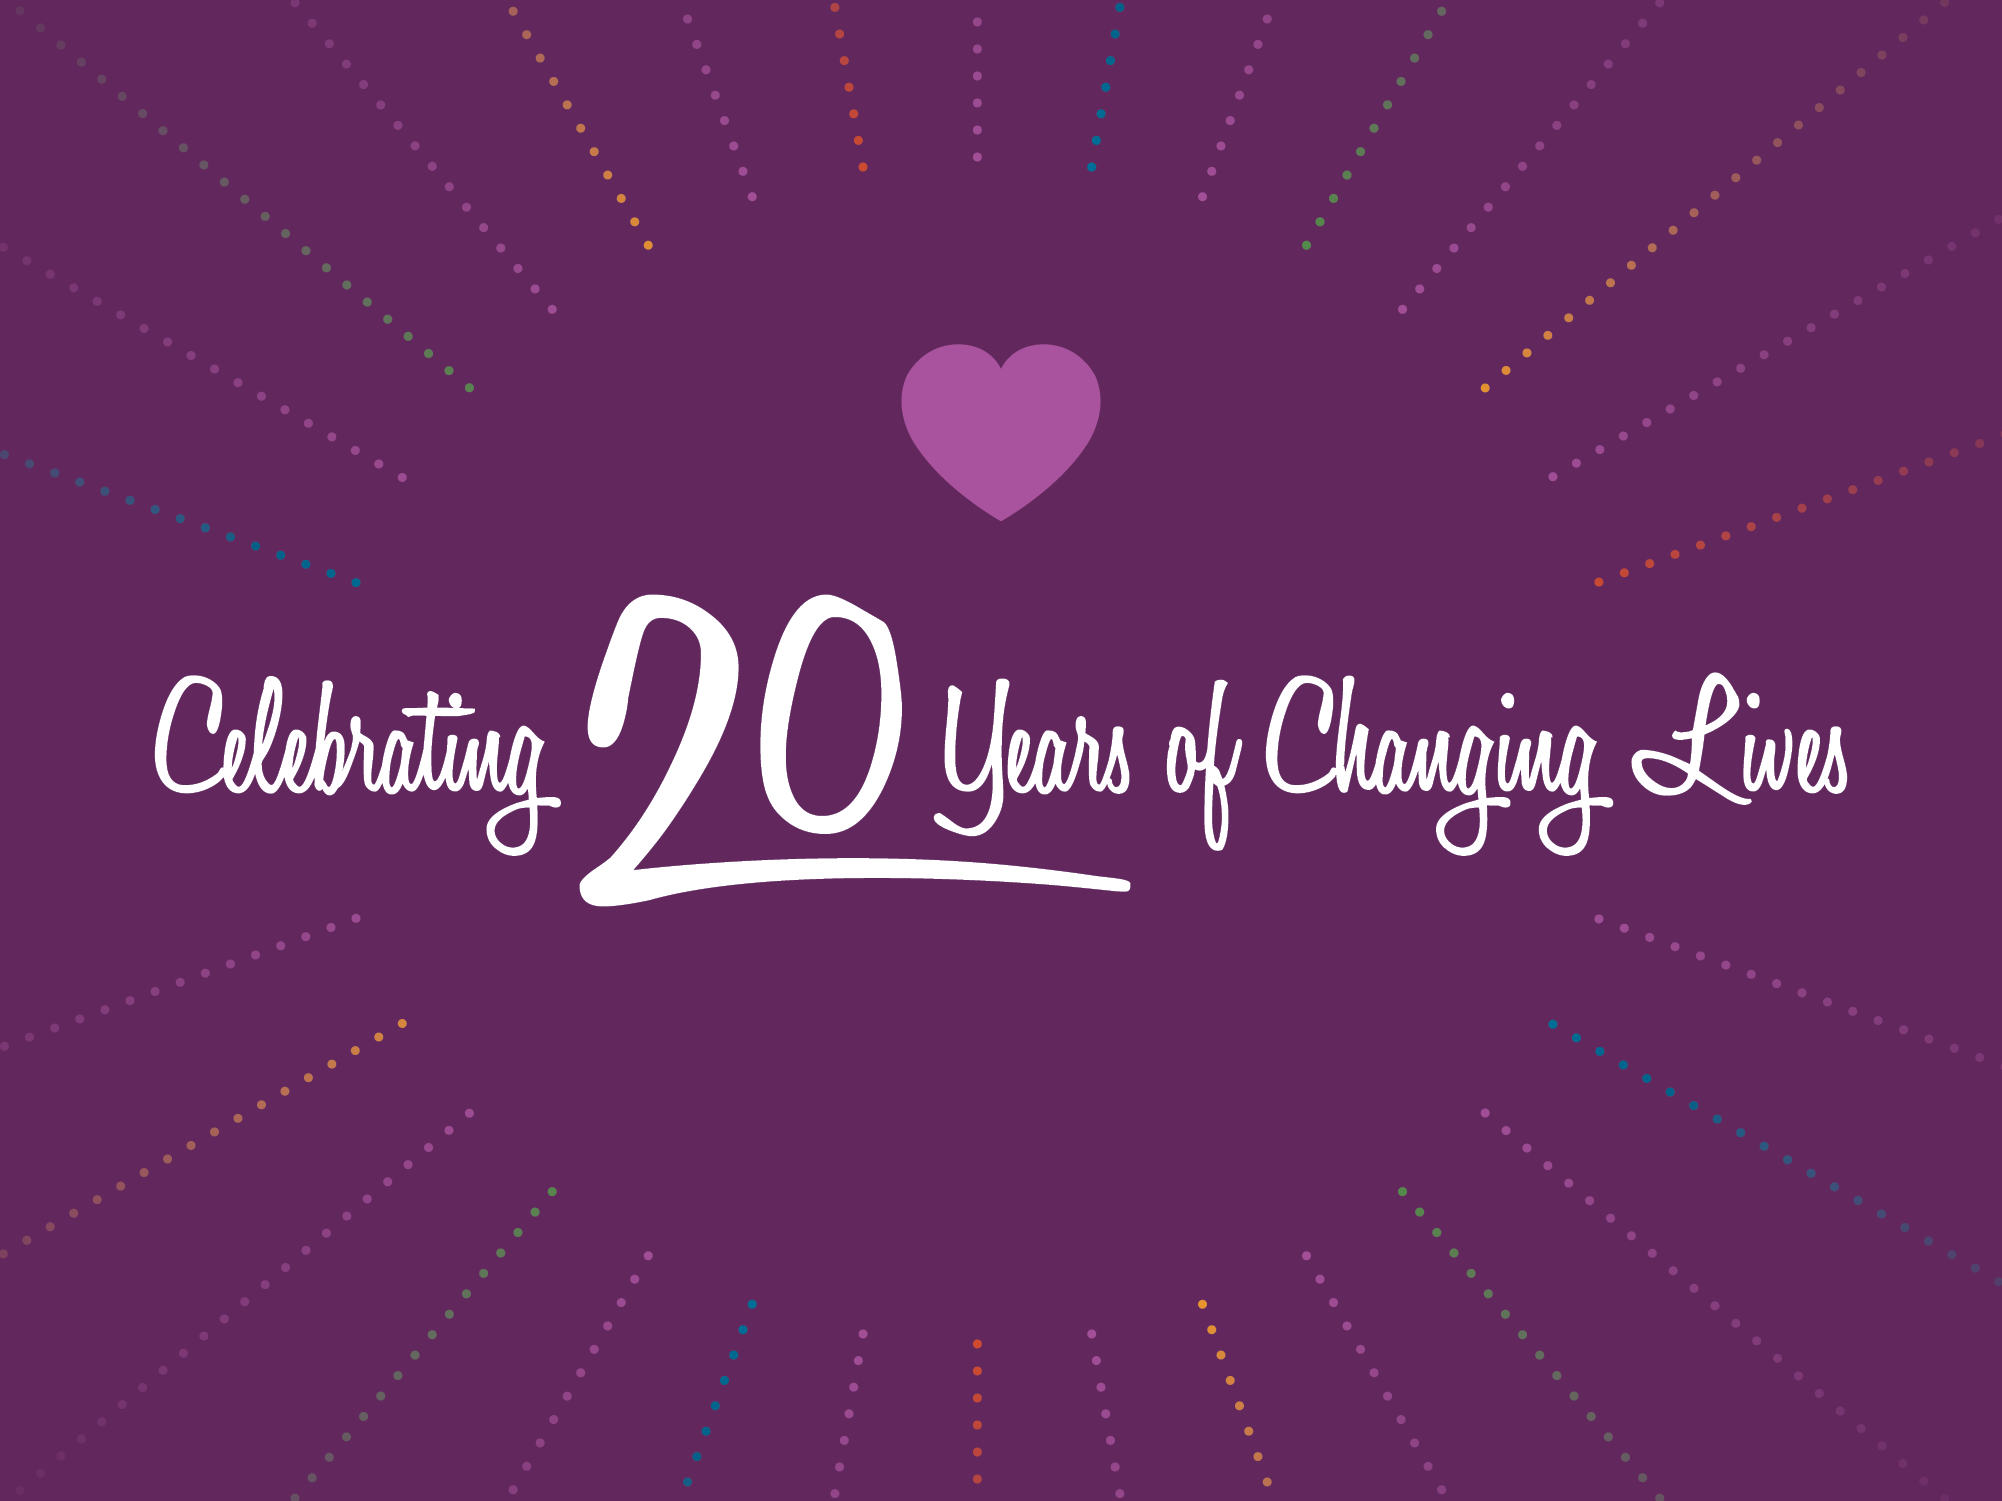 Celebrating 20 Years of Changing Lives